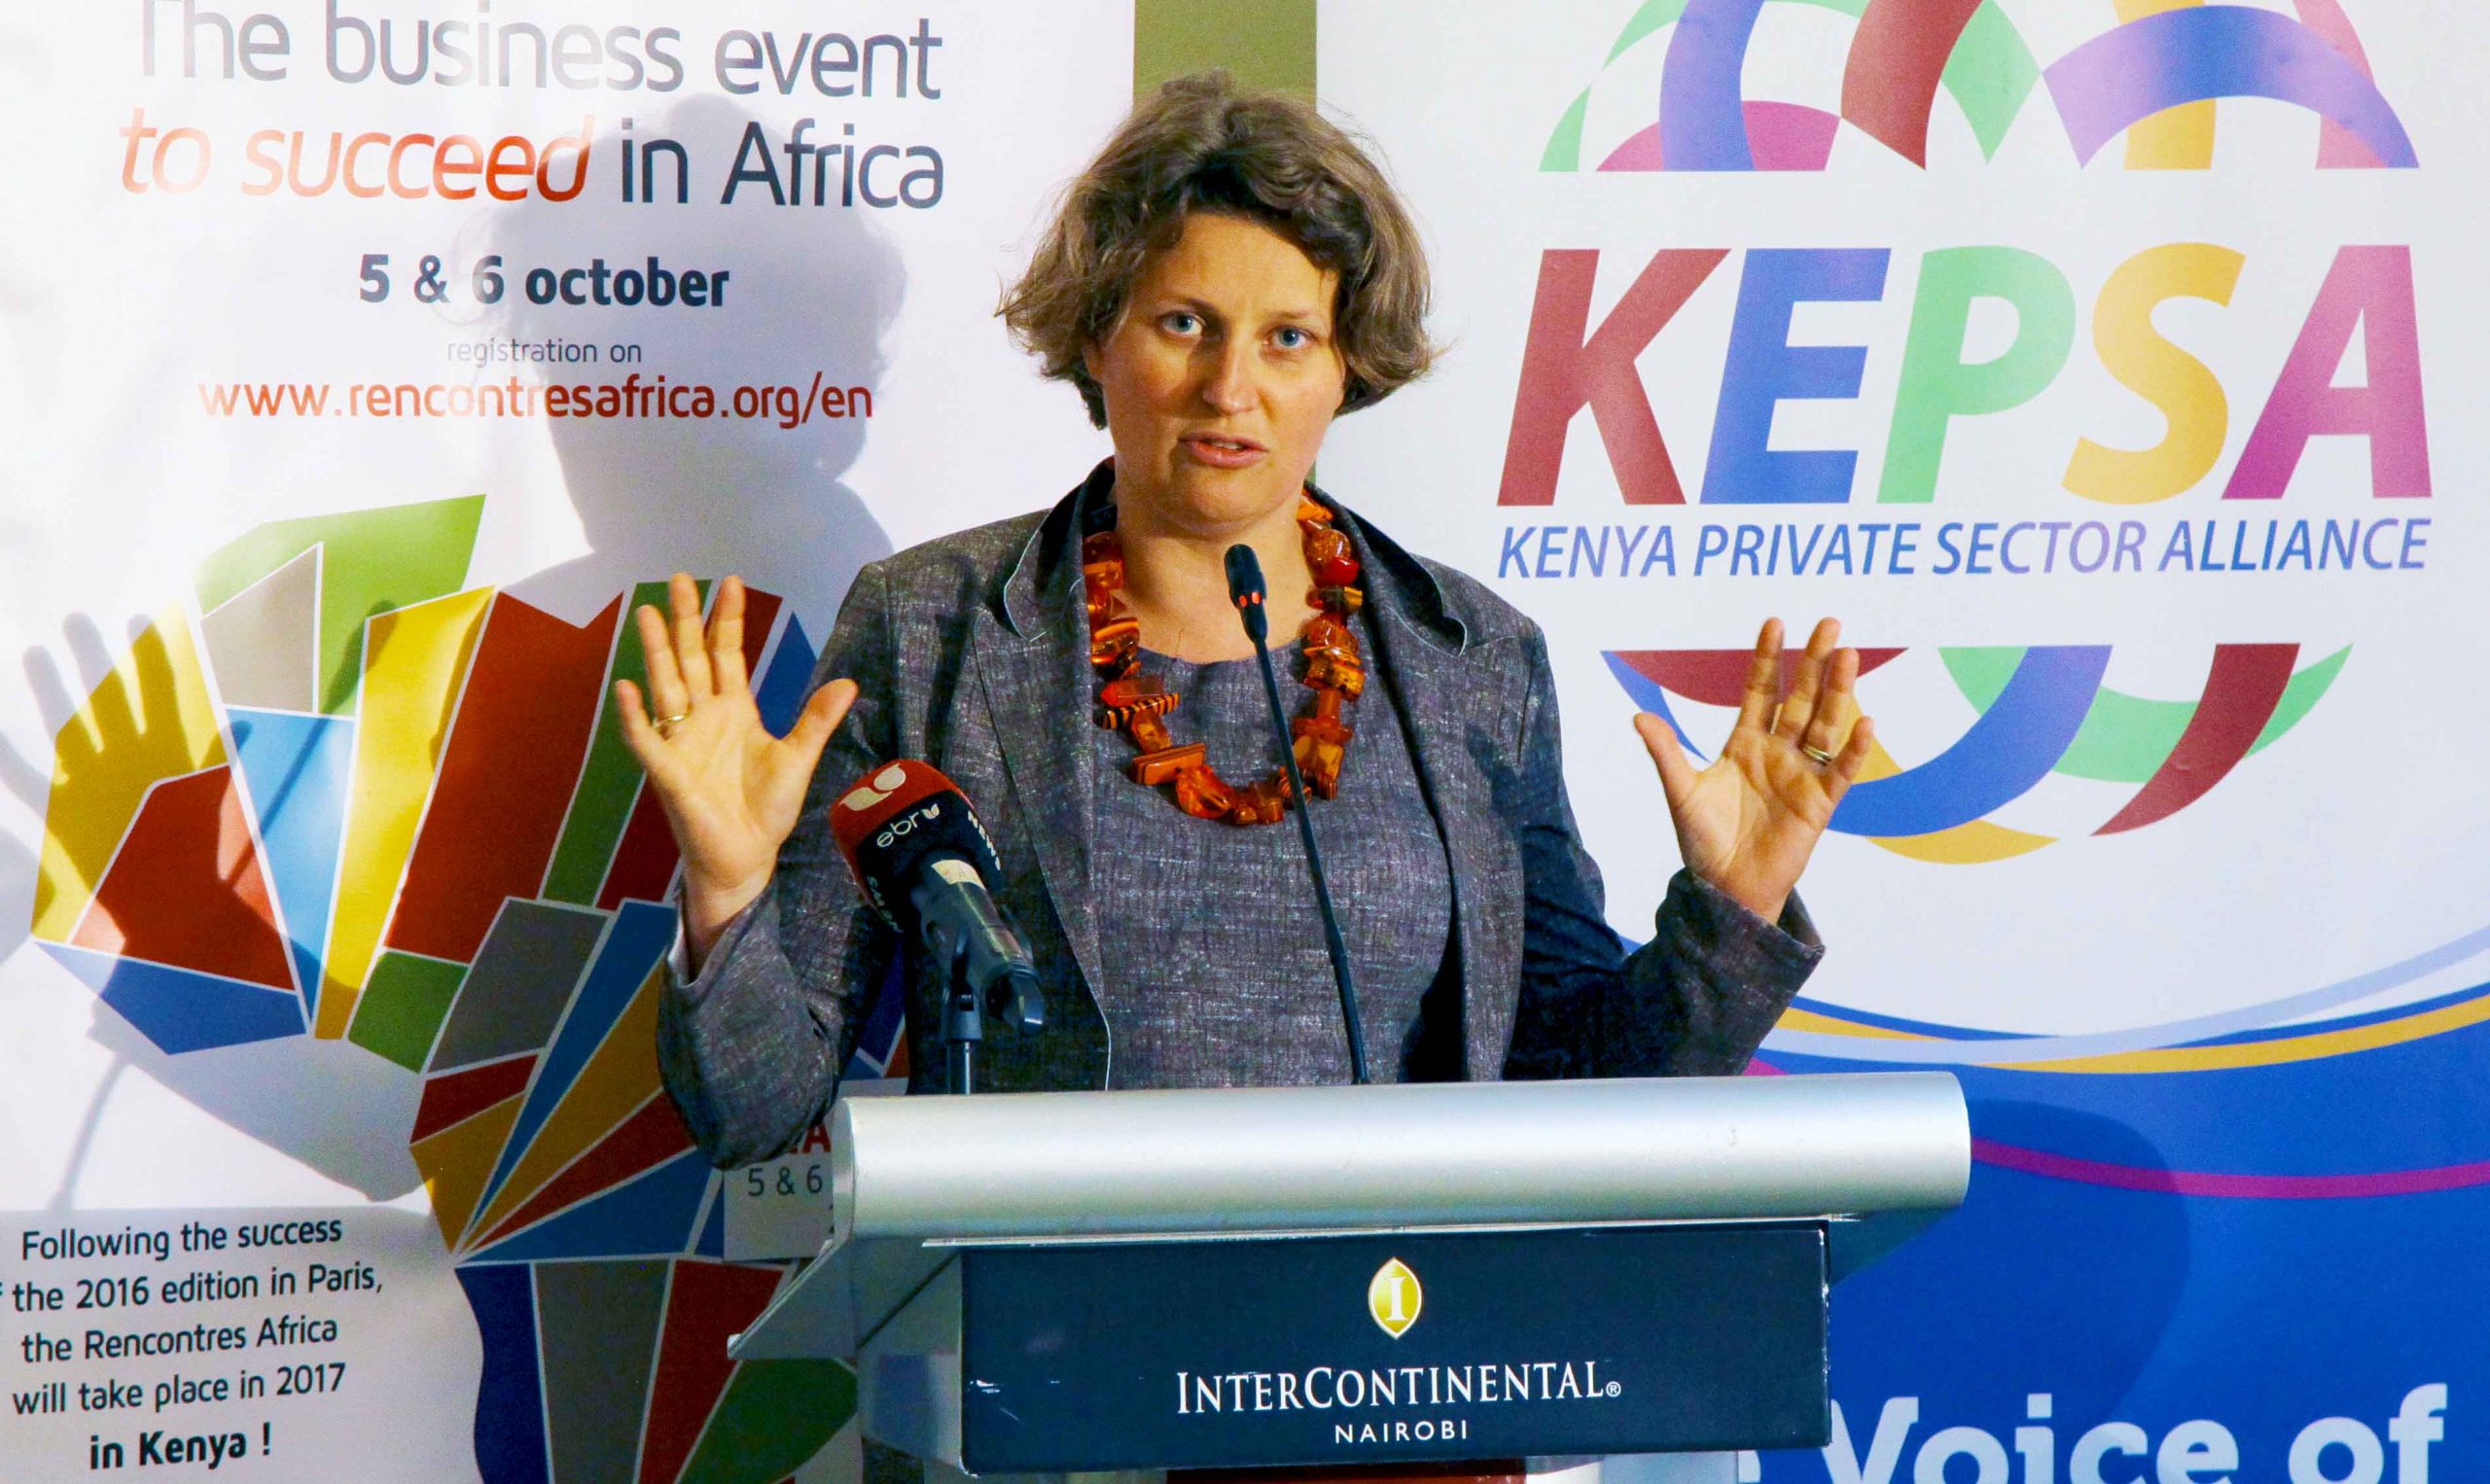 French, Kenyan tech-preneurs to attend Les Rencontres Africa